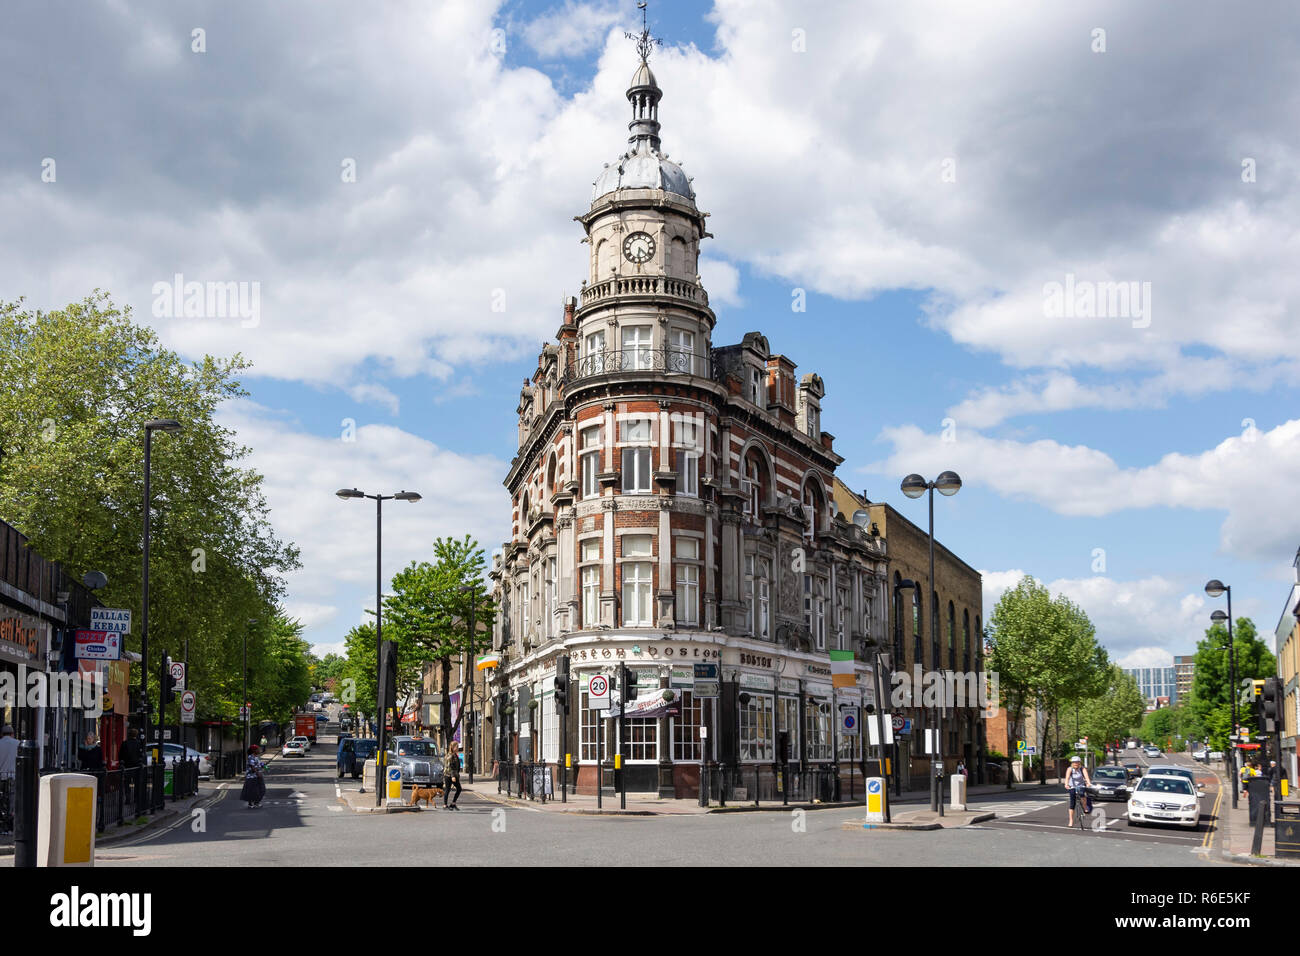 Boston Arms Pub, Junction Road, Tufnell Park, London Borough of Camden, Greater London, England, United Kingdom Stock Photo